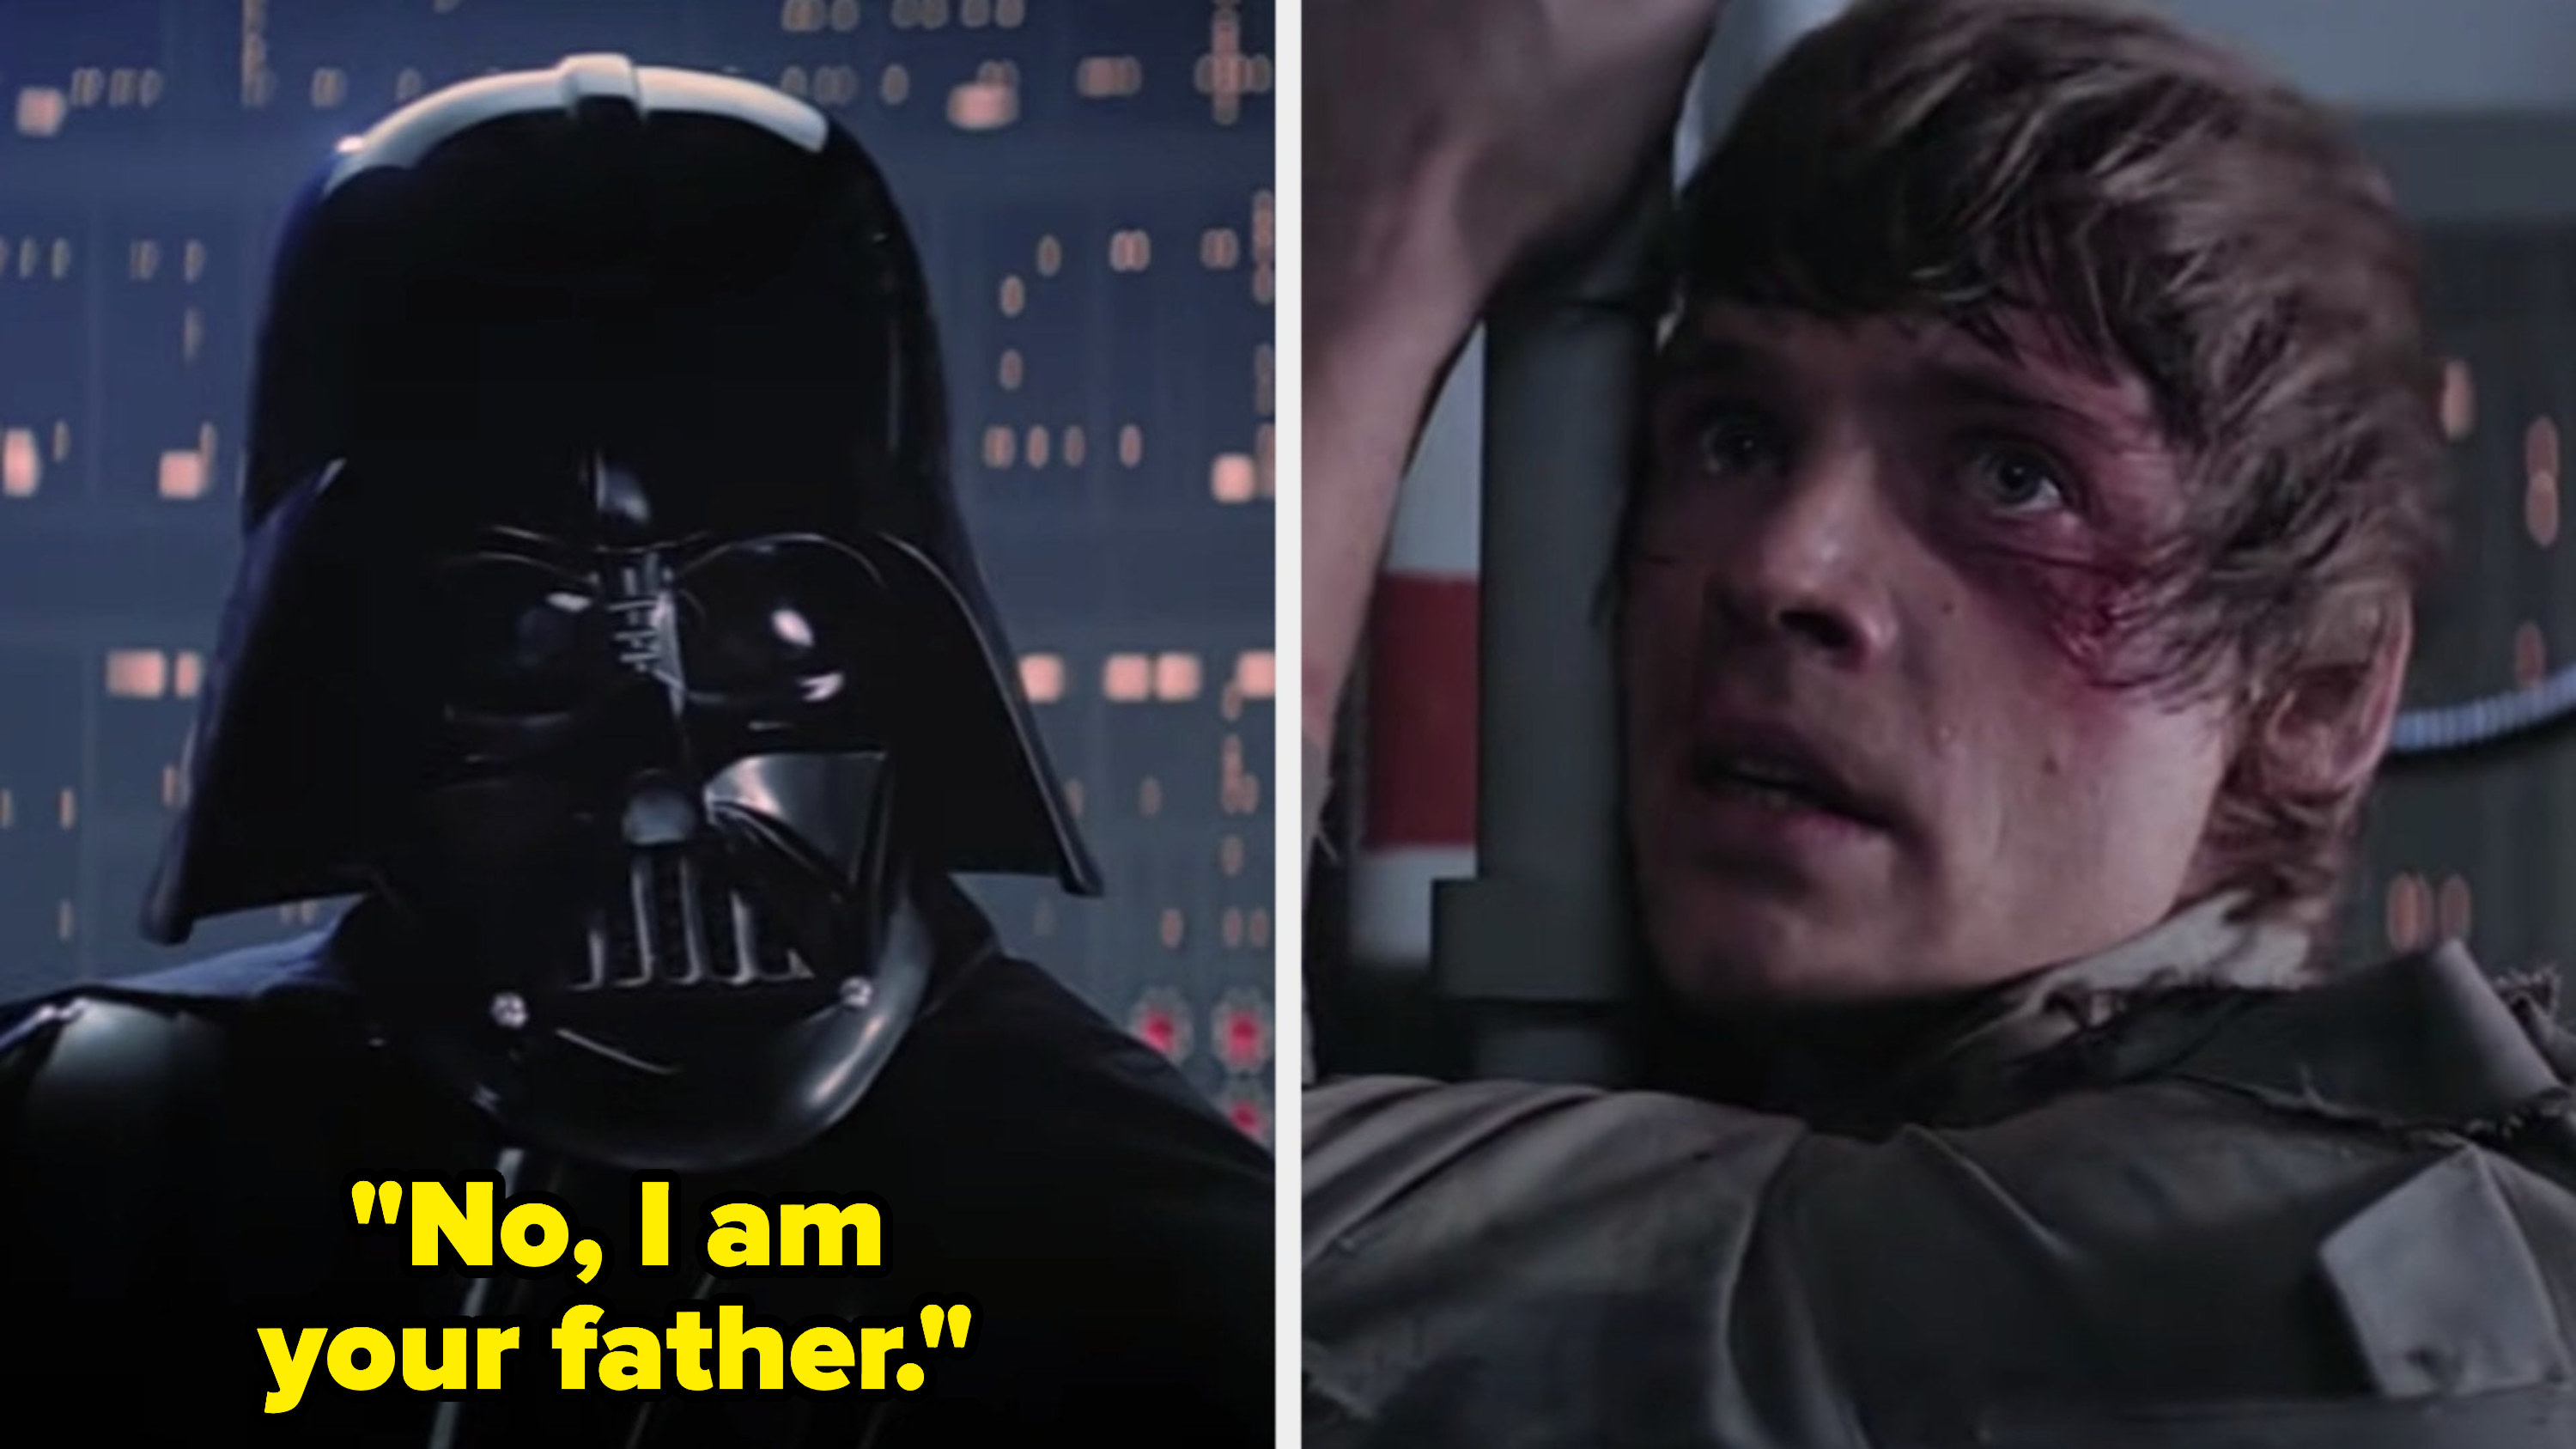 Darth Vader telling Luke Skywalker: &quot;No, I am your father&quot;